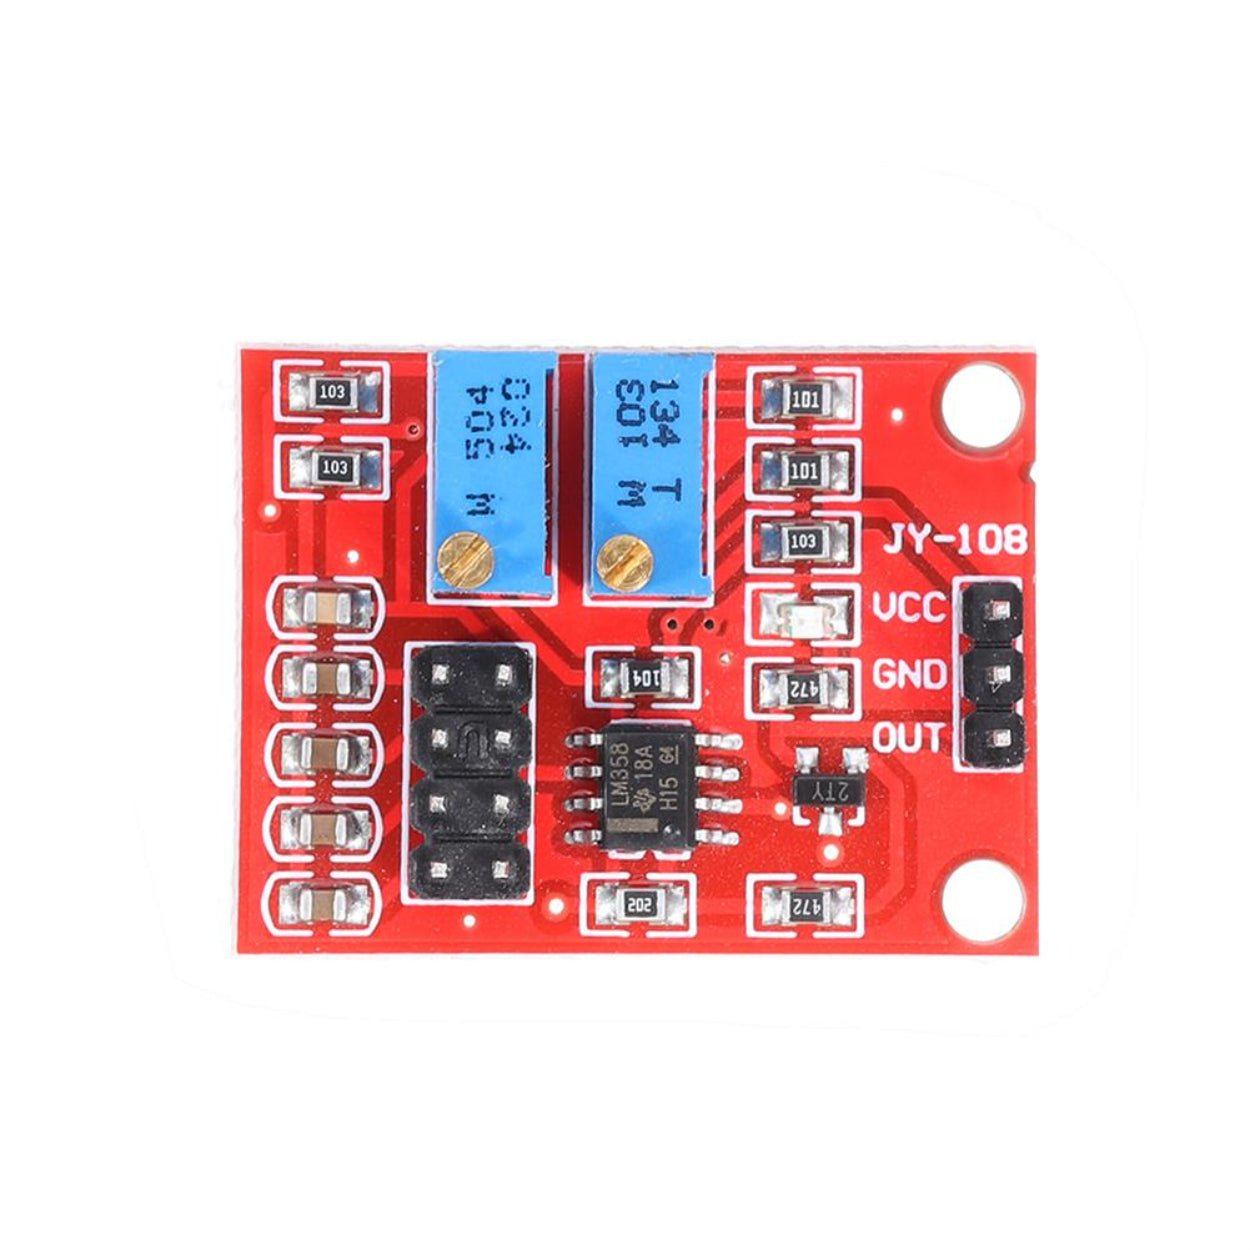 New NE555 Pulse Module LM358 Duty Cycle Frequency Adjustable Module Square Wave